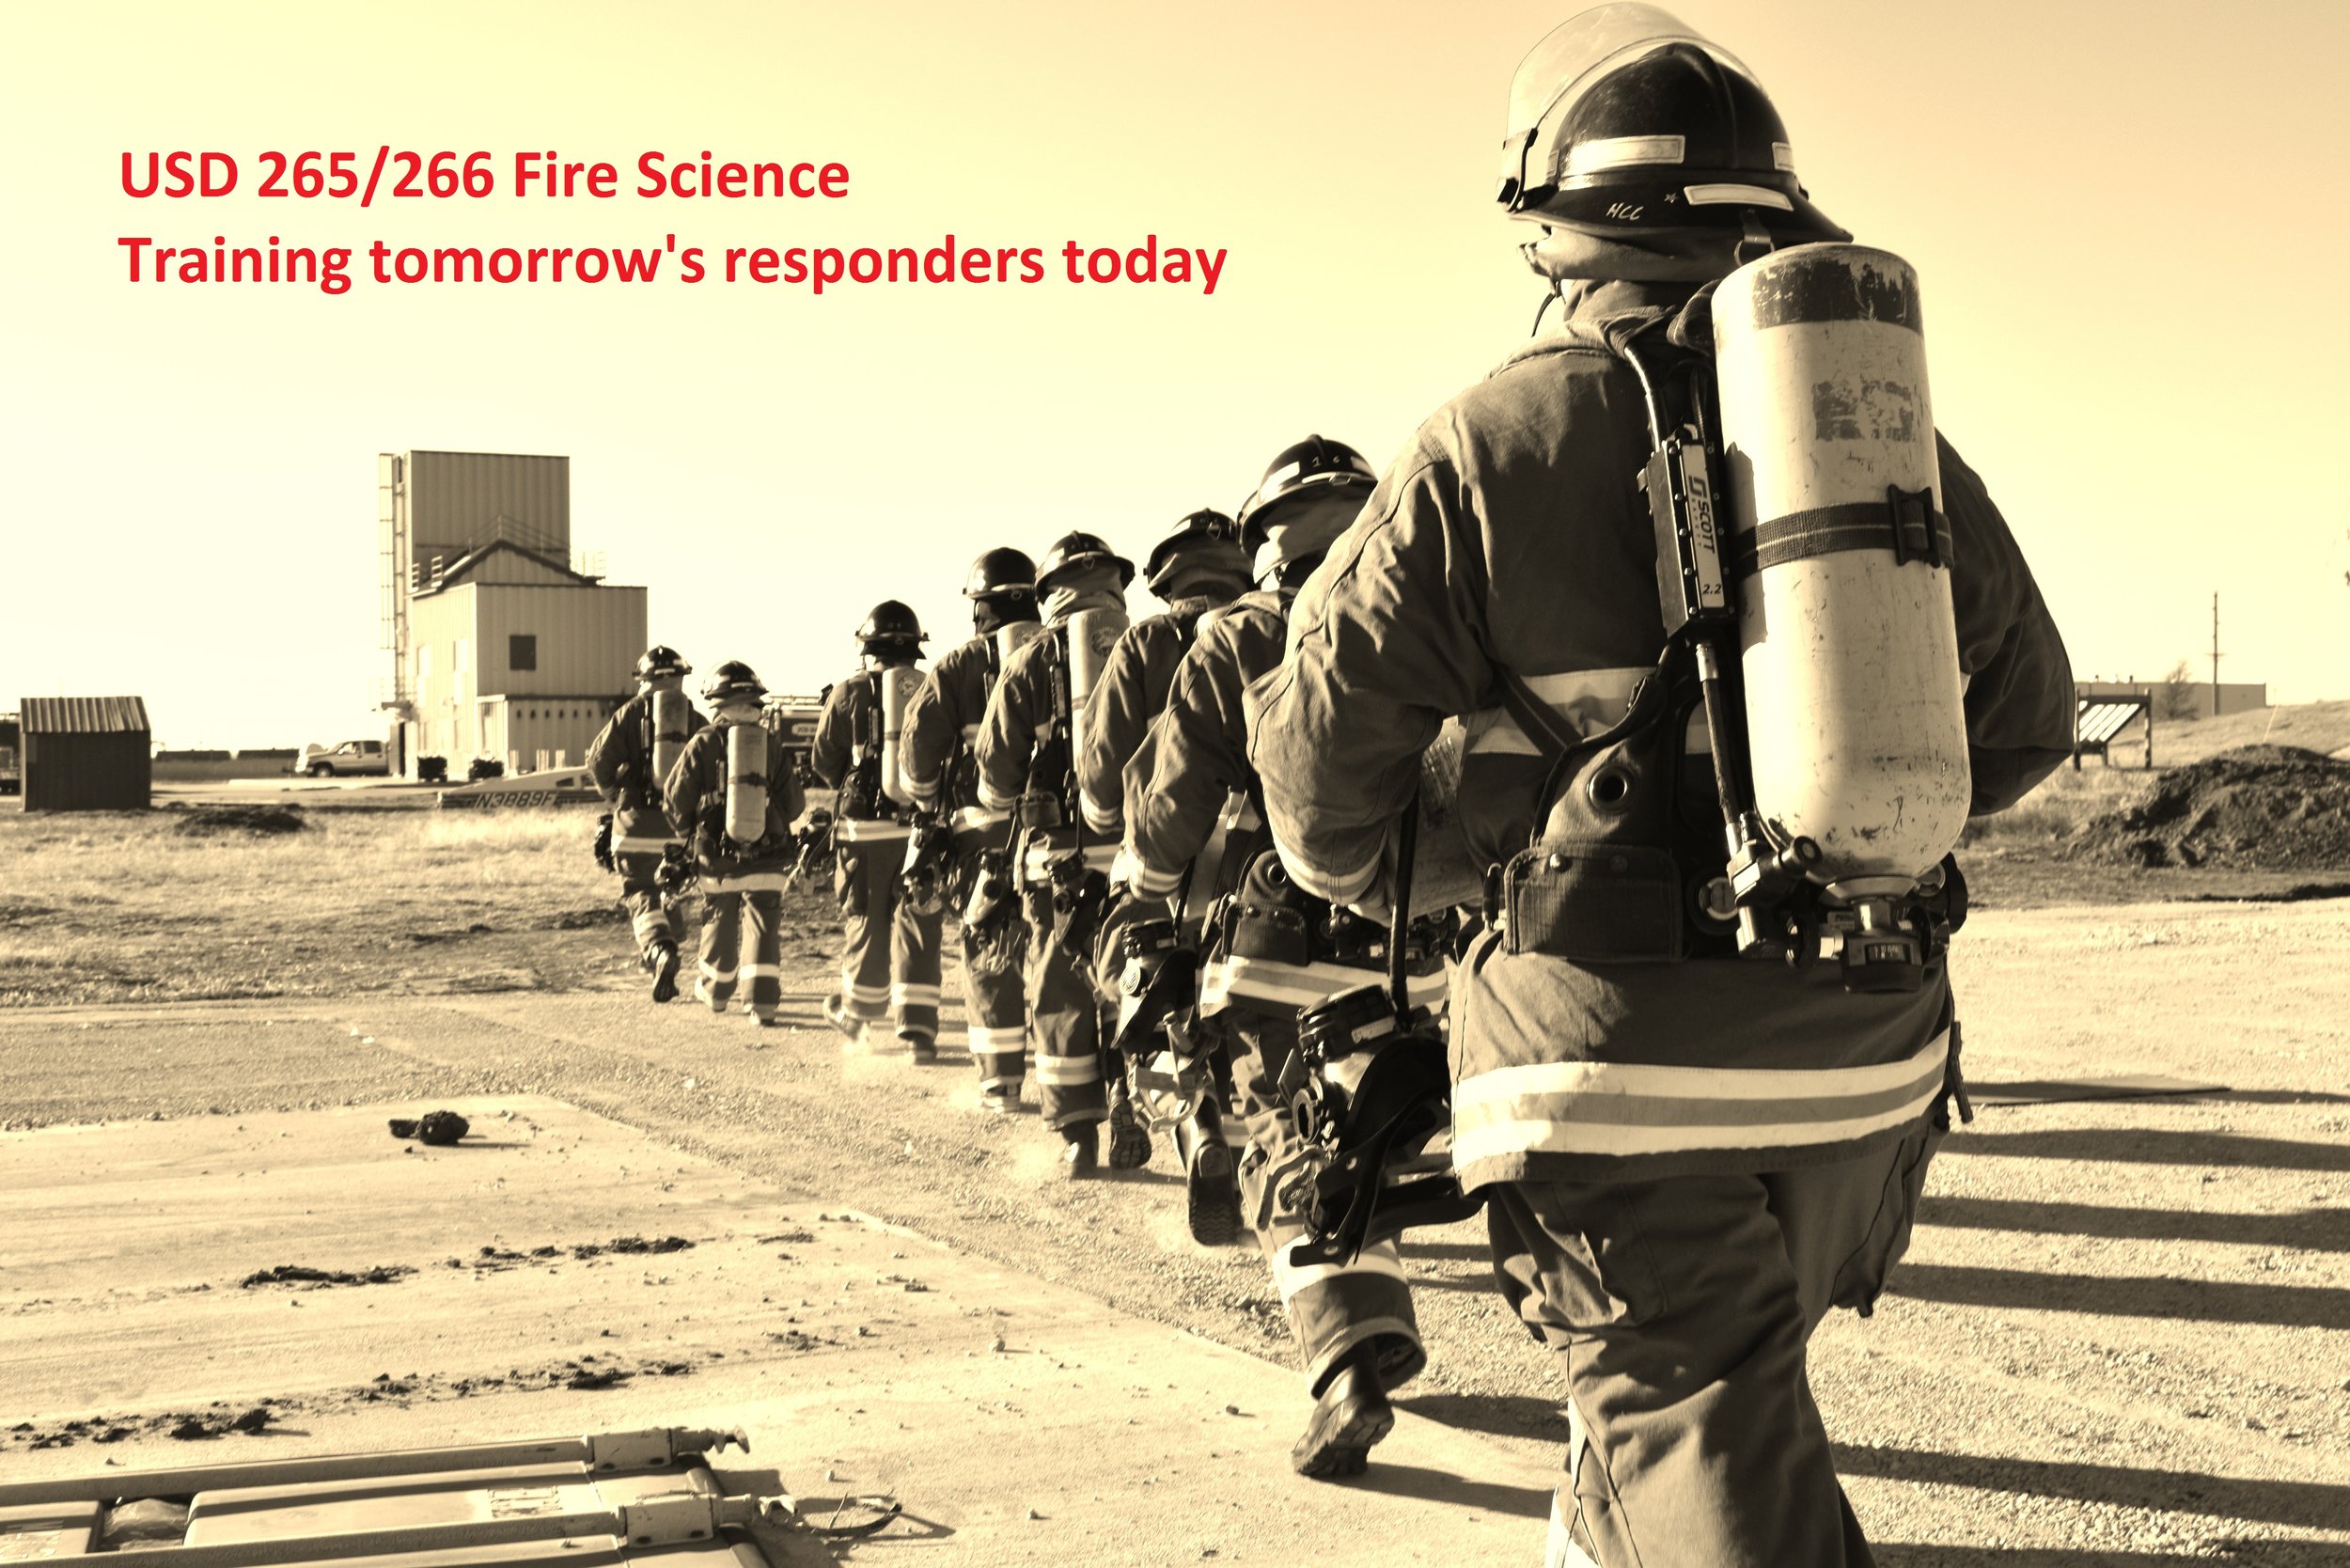 Fire Science students walking towards practice facility.